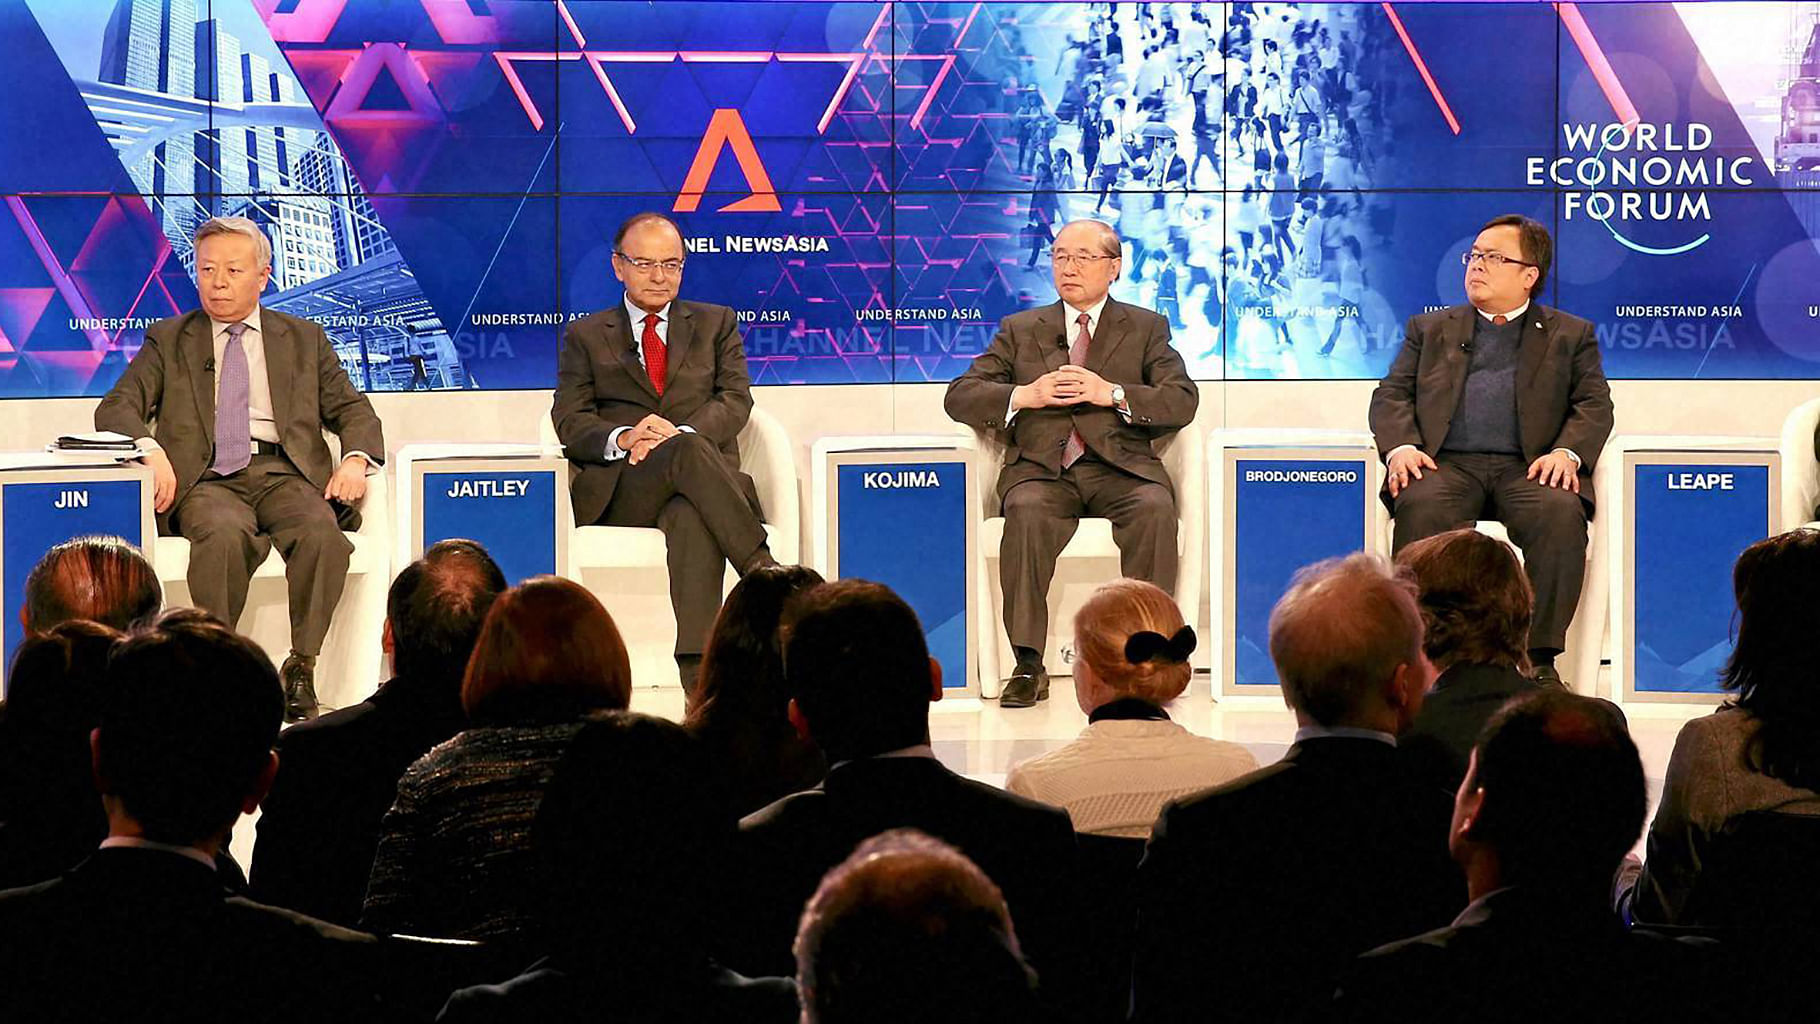 Finance Minister Arun Jaitley and other dignitaries during the session of <i>Asia’s Era of Infrastructure </i>at the Annual Meeting 2016 of the World Economic Forum in Davos, Switzerland on Friday. (Photo: PTI)